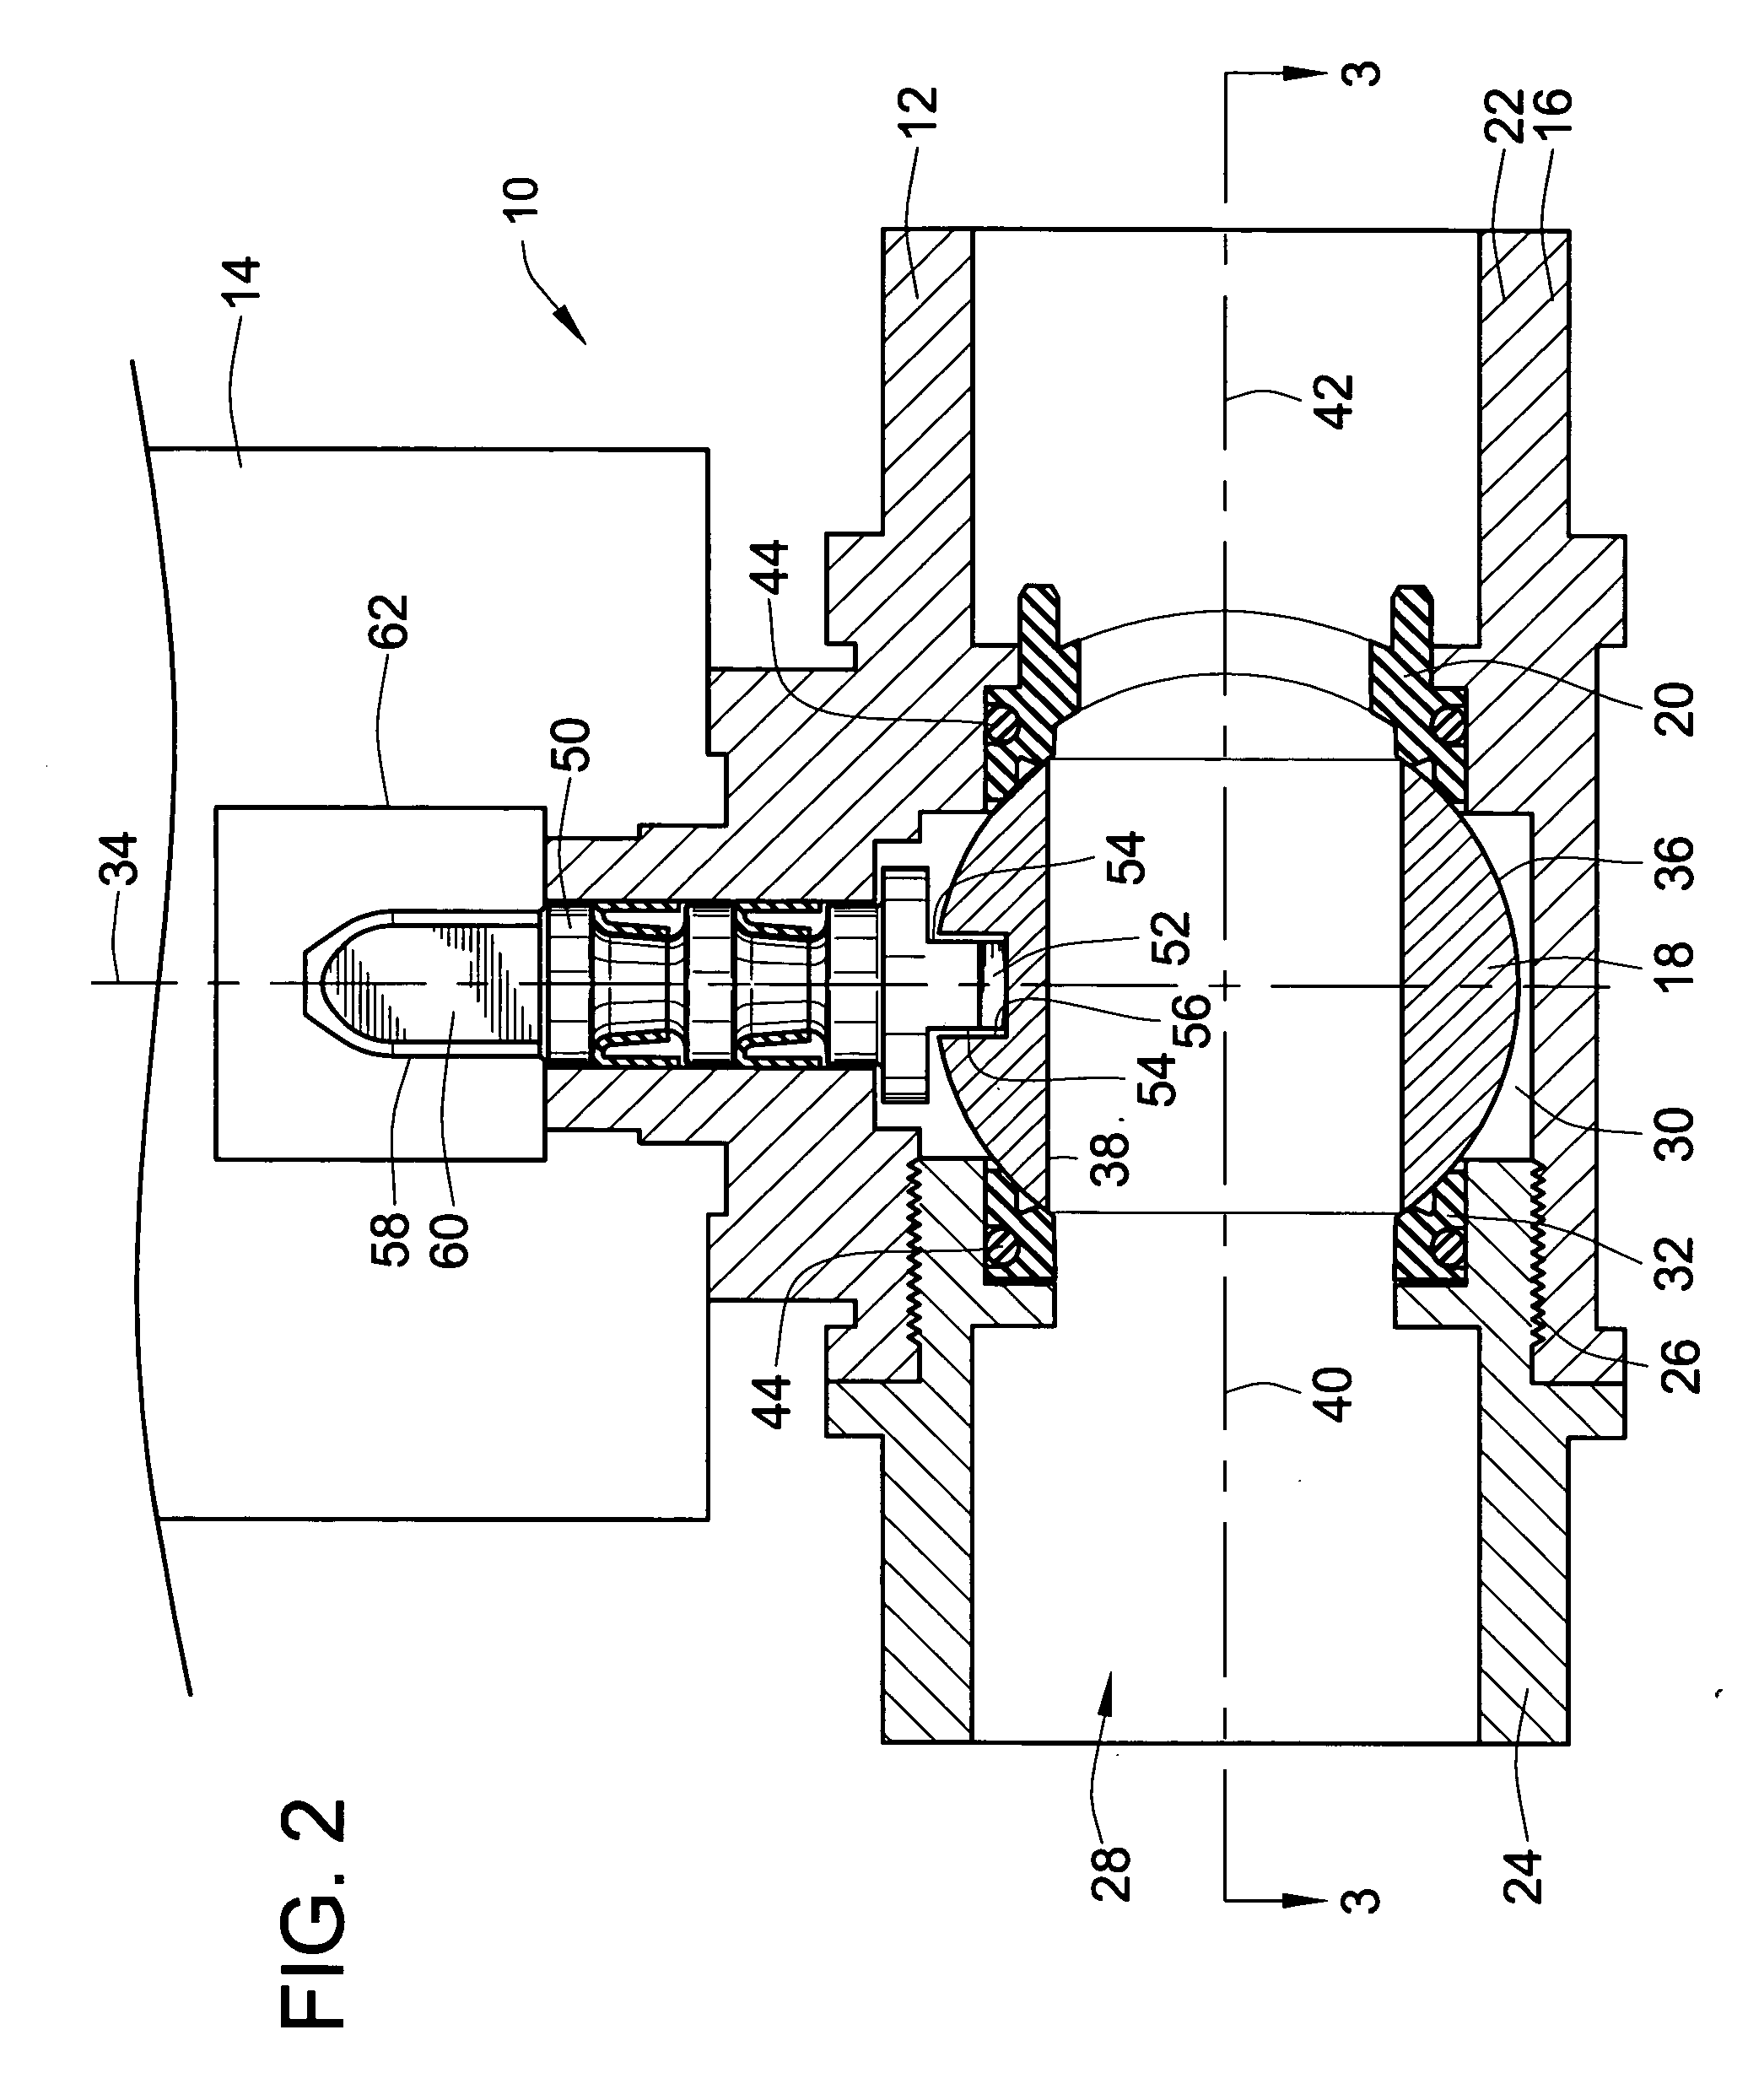 Apparatus and method for replacing existing actuator zone valves in an HVAC system with a ball valve